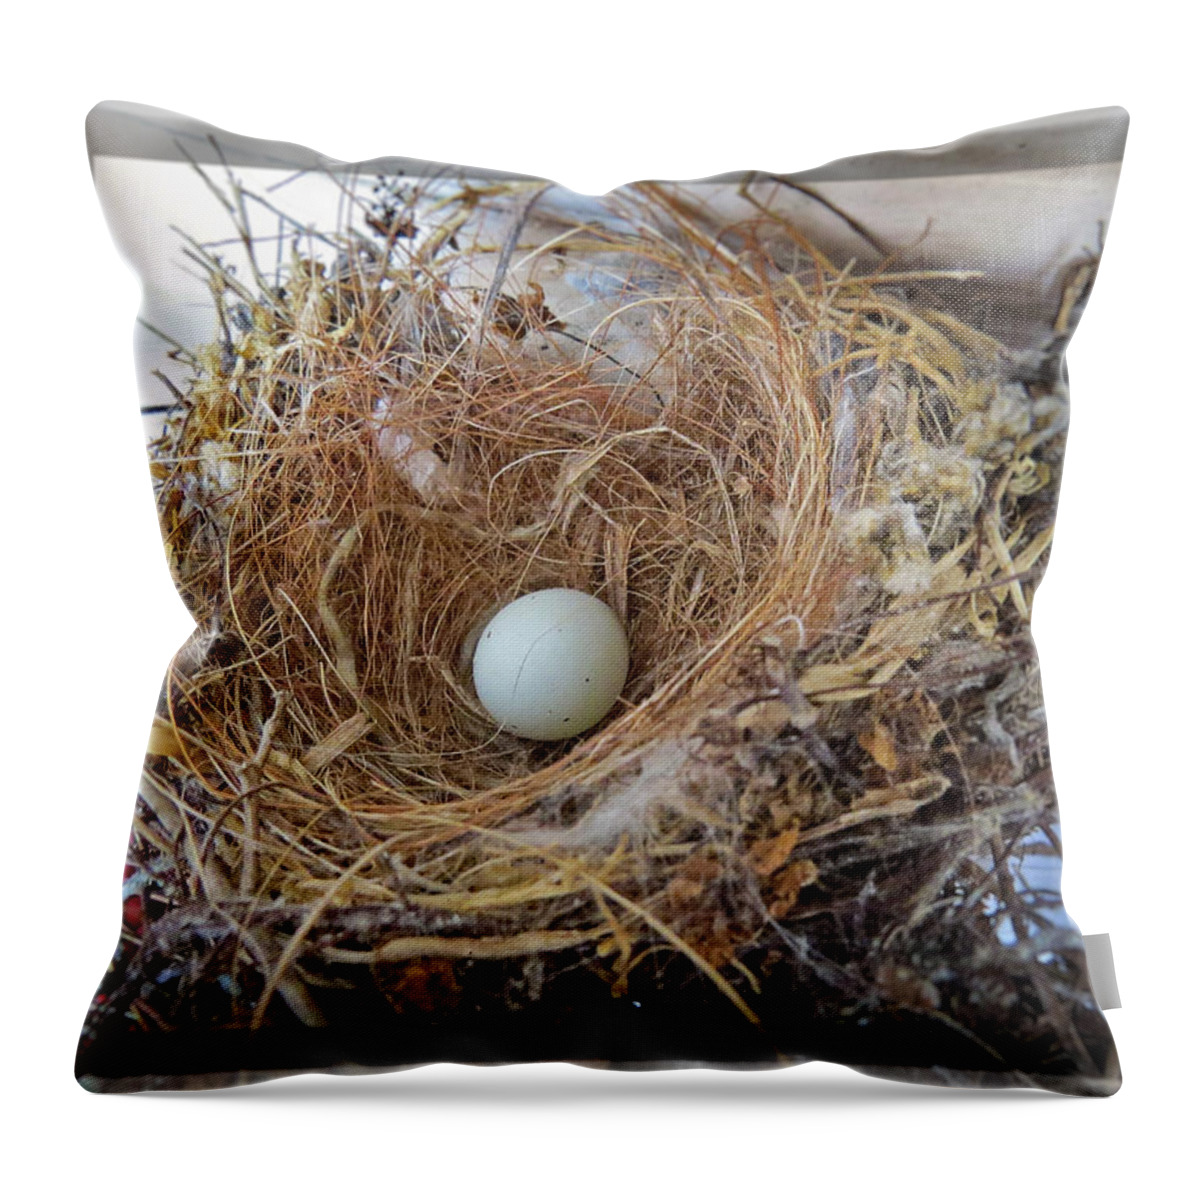 Birds Nest Throw Pillow featuring the photograph Birds Nest - Perfect Home by Ella Kaye Dickey